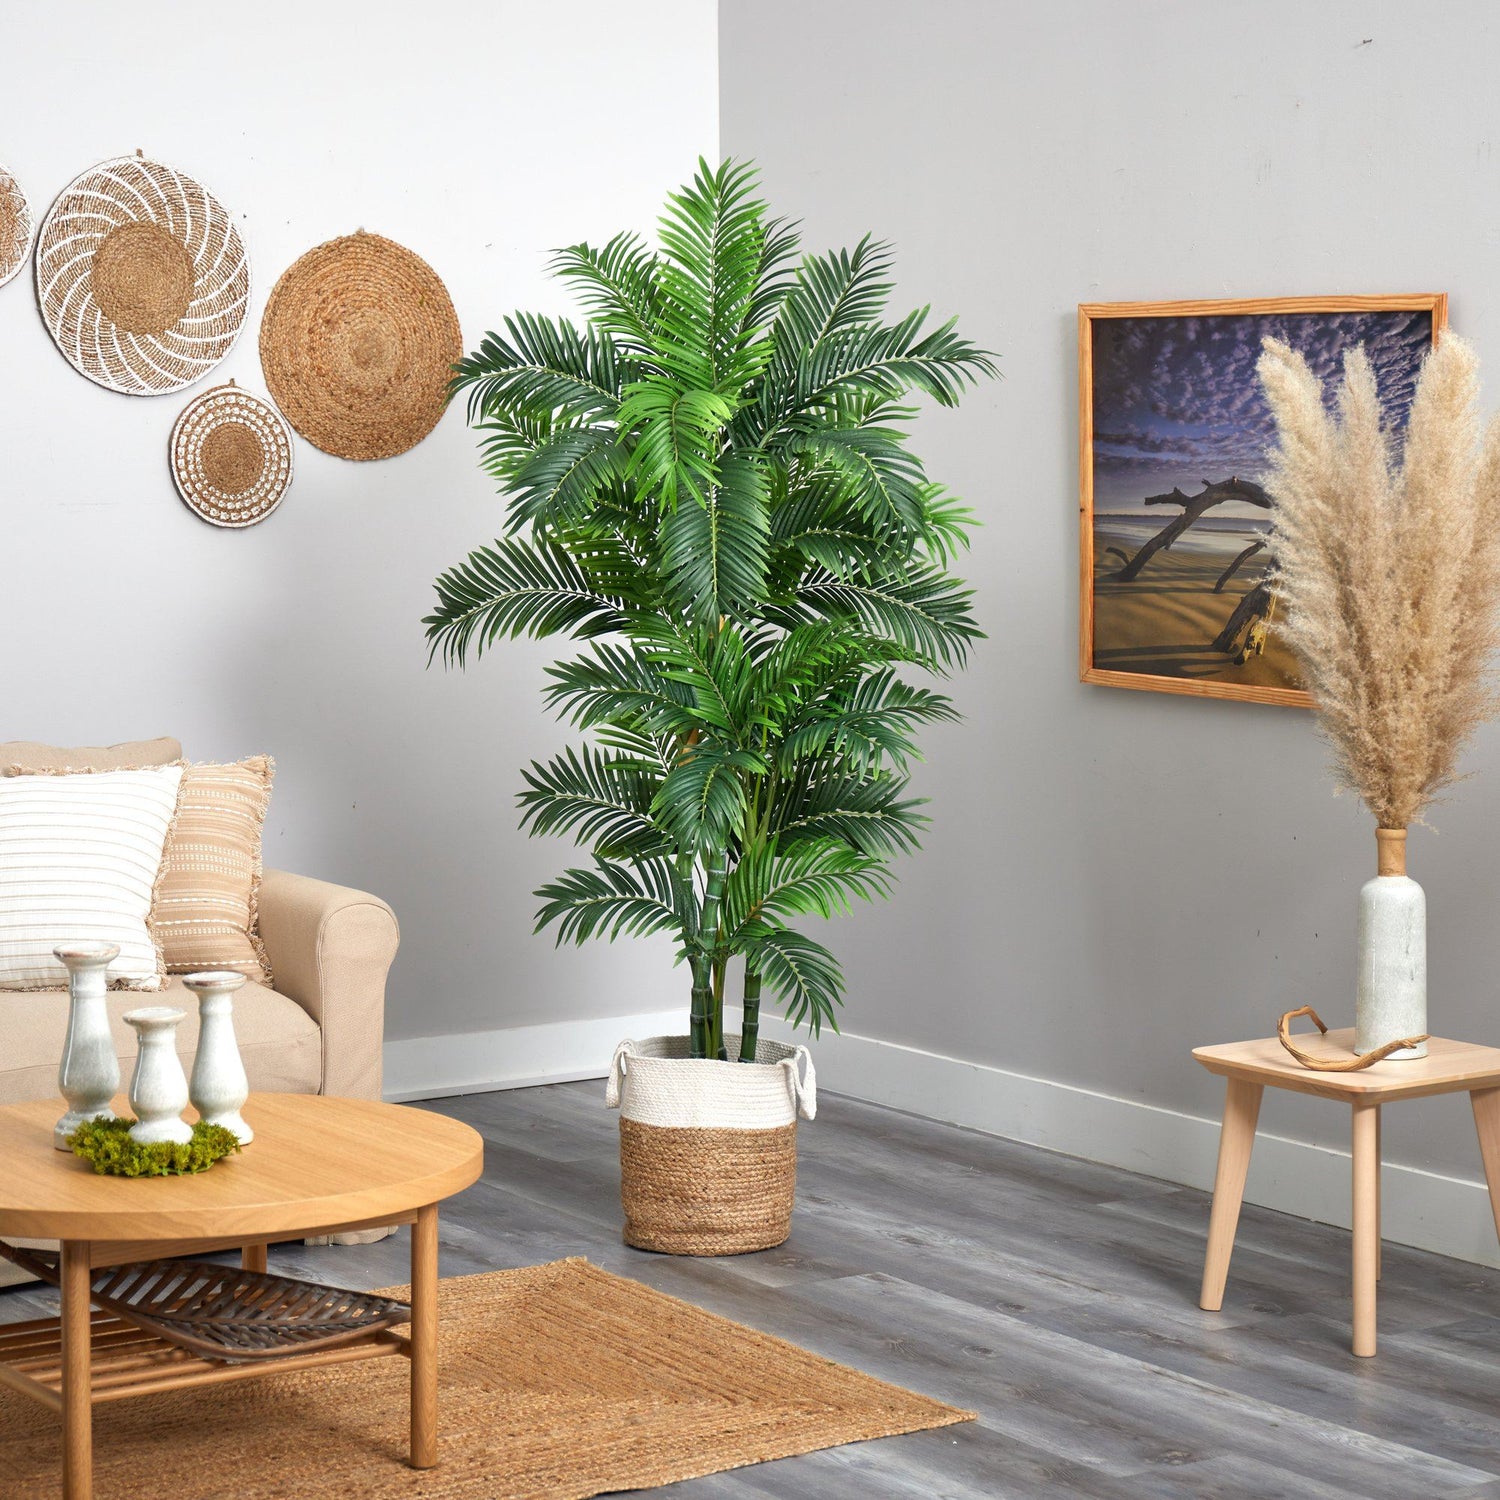 6’ Curvy Parlor Artificial Palm Tree in Handmade Natural Jute and Cotton Planter